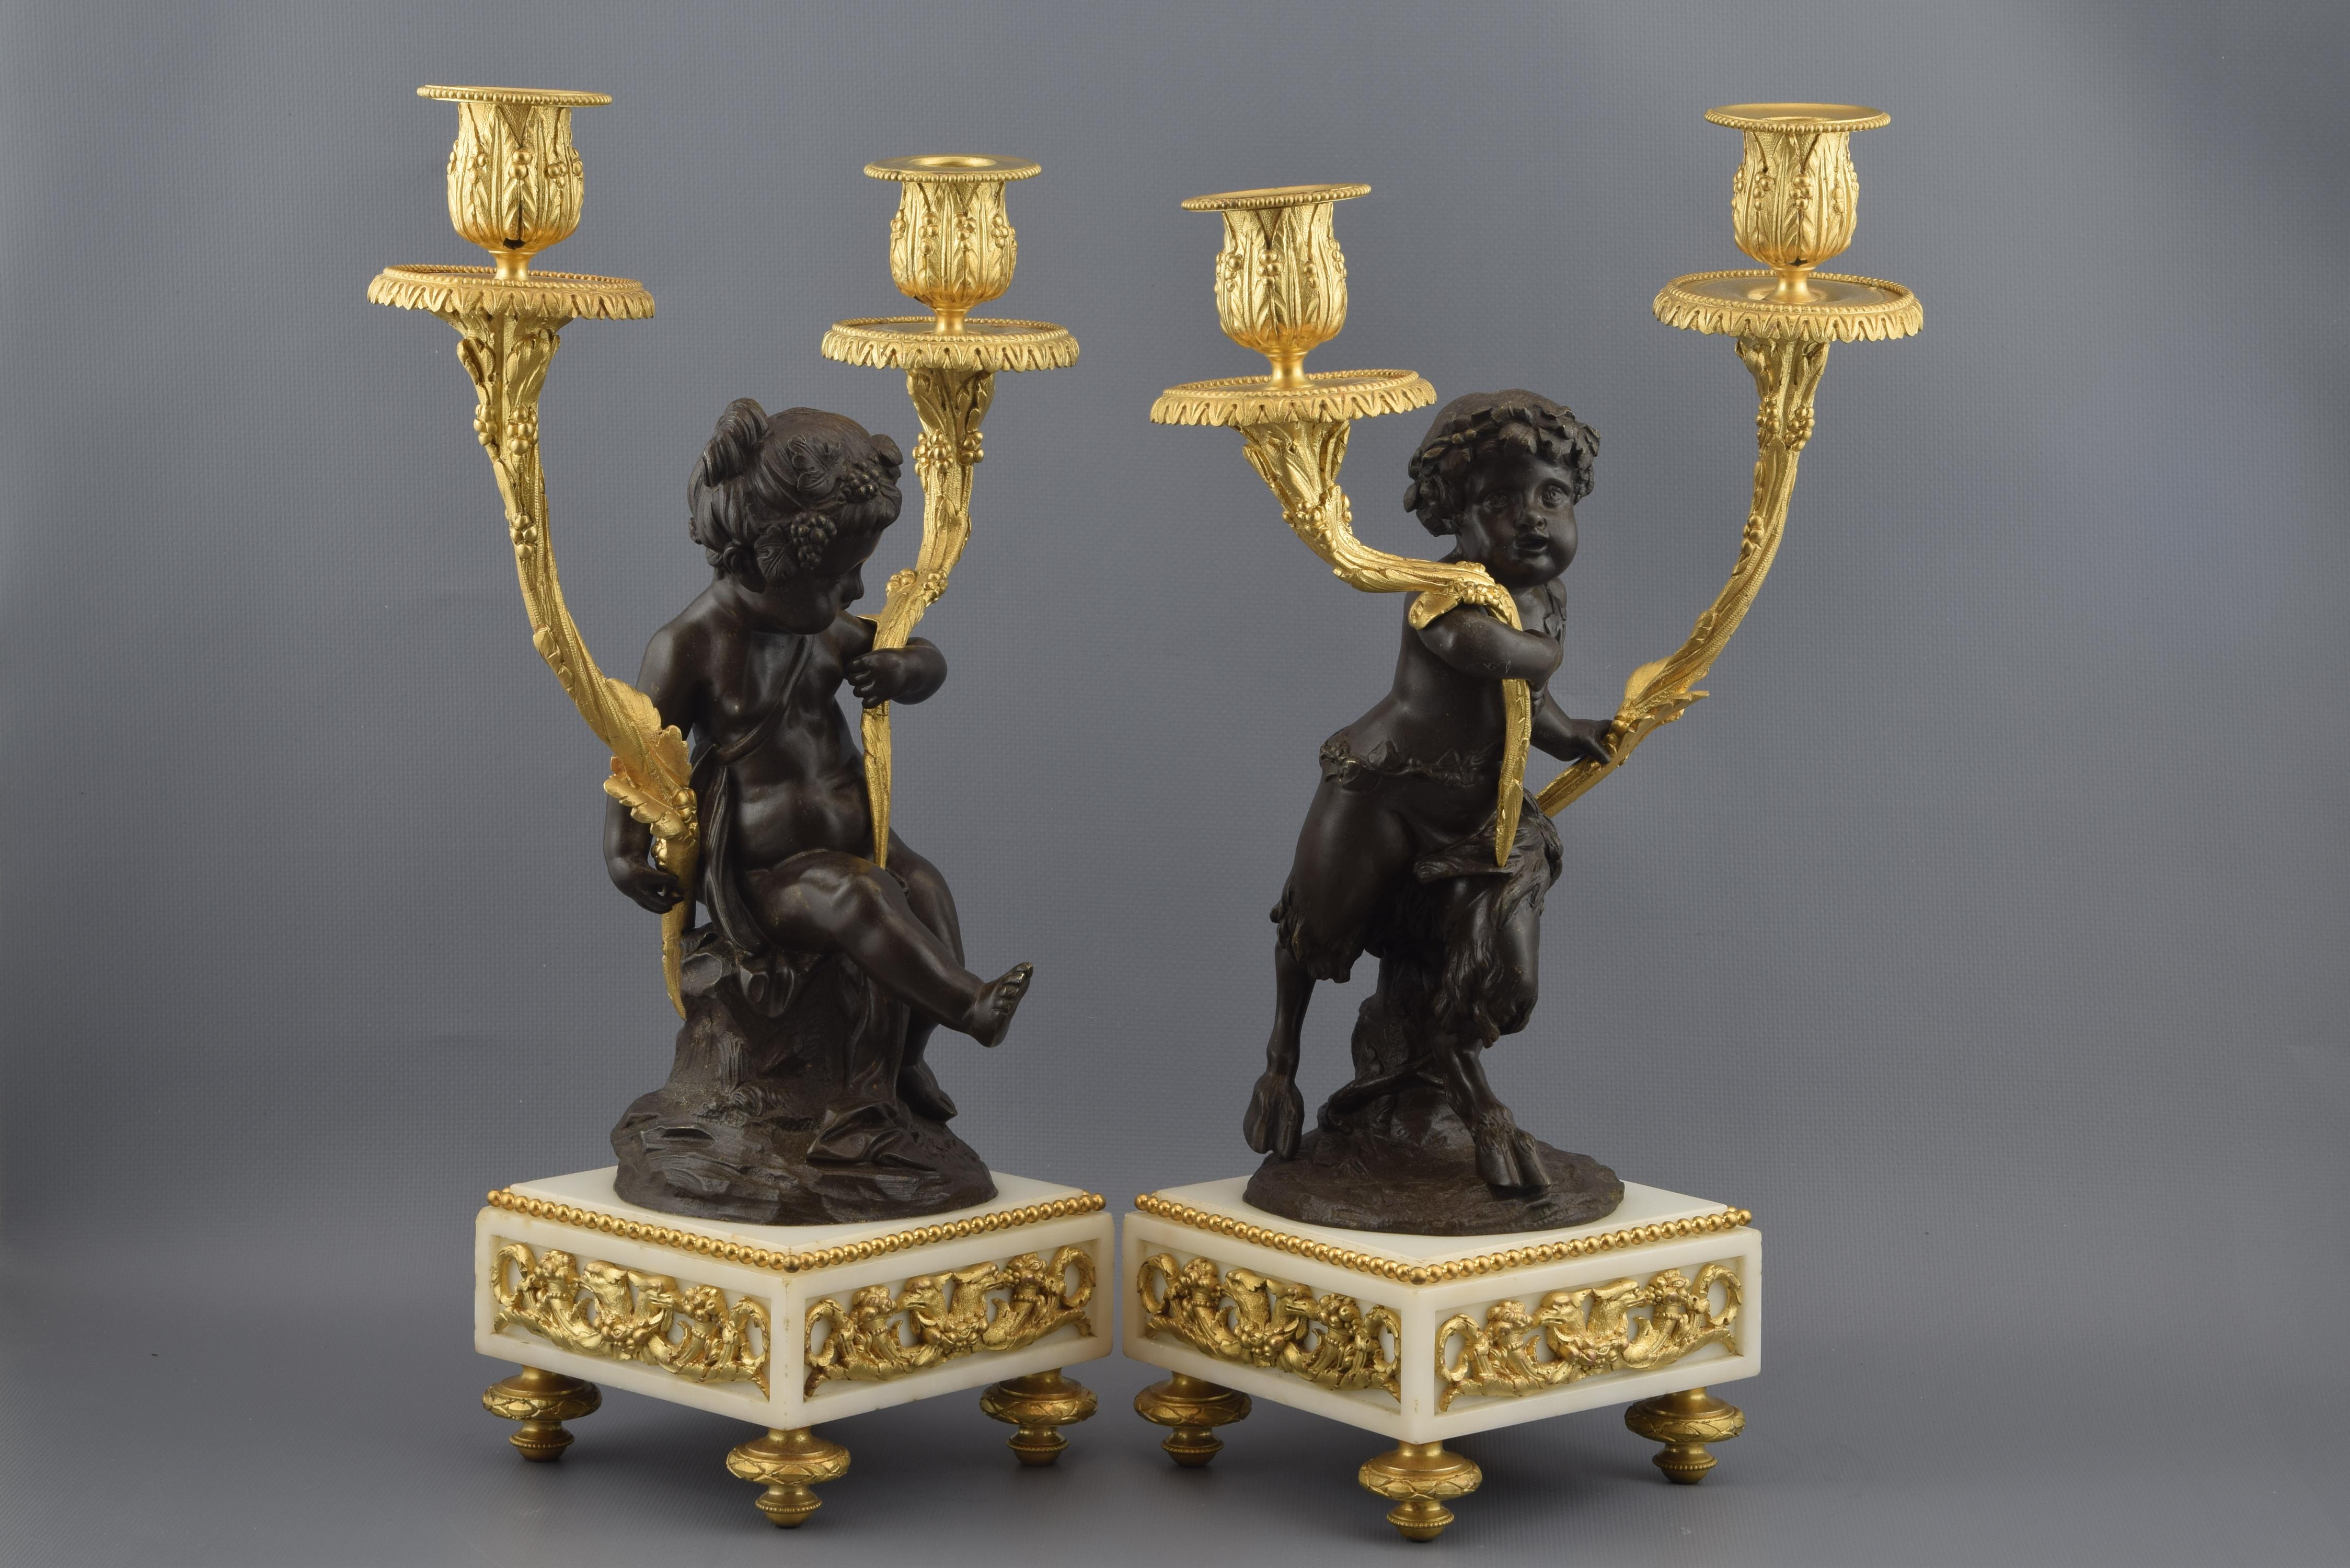 Neoclassical Pair of Candelabrum, after 